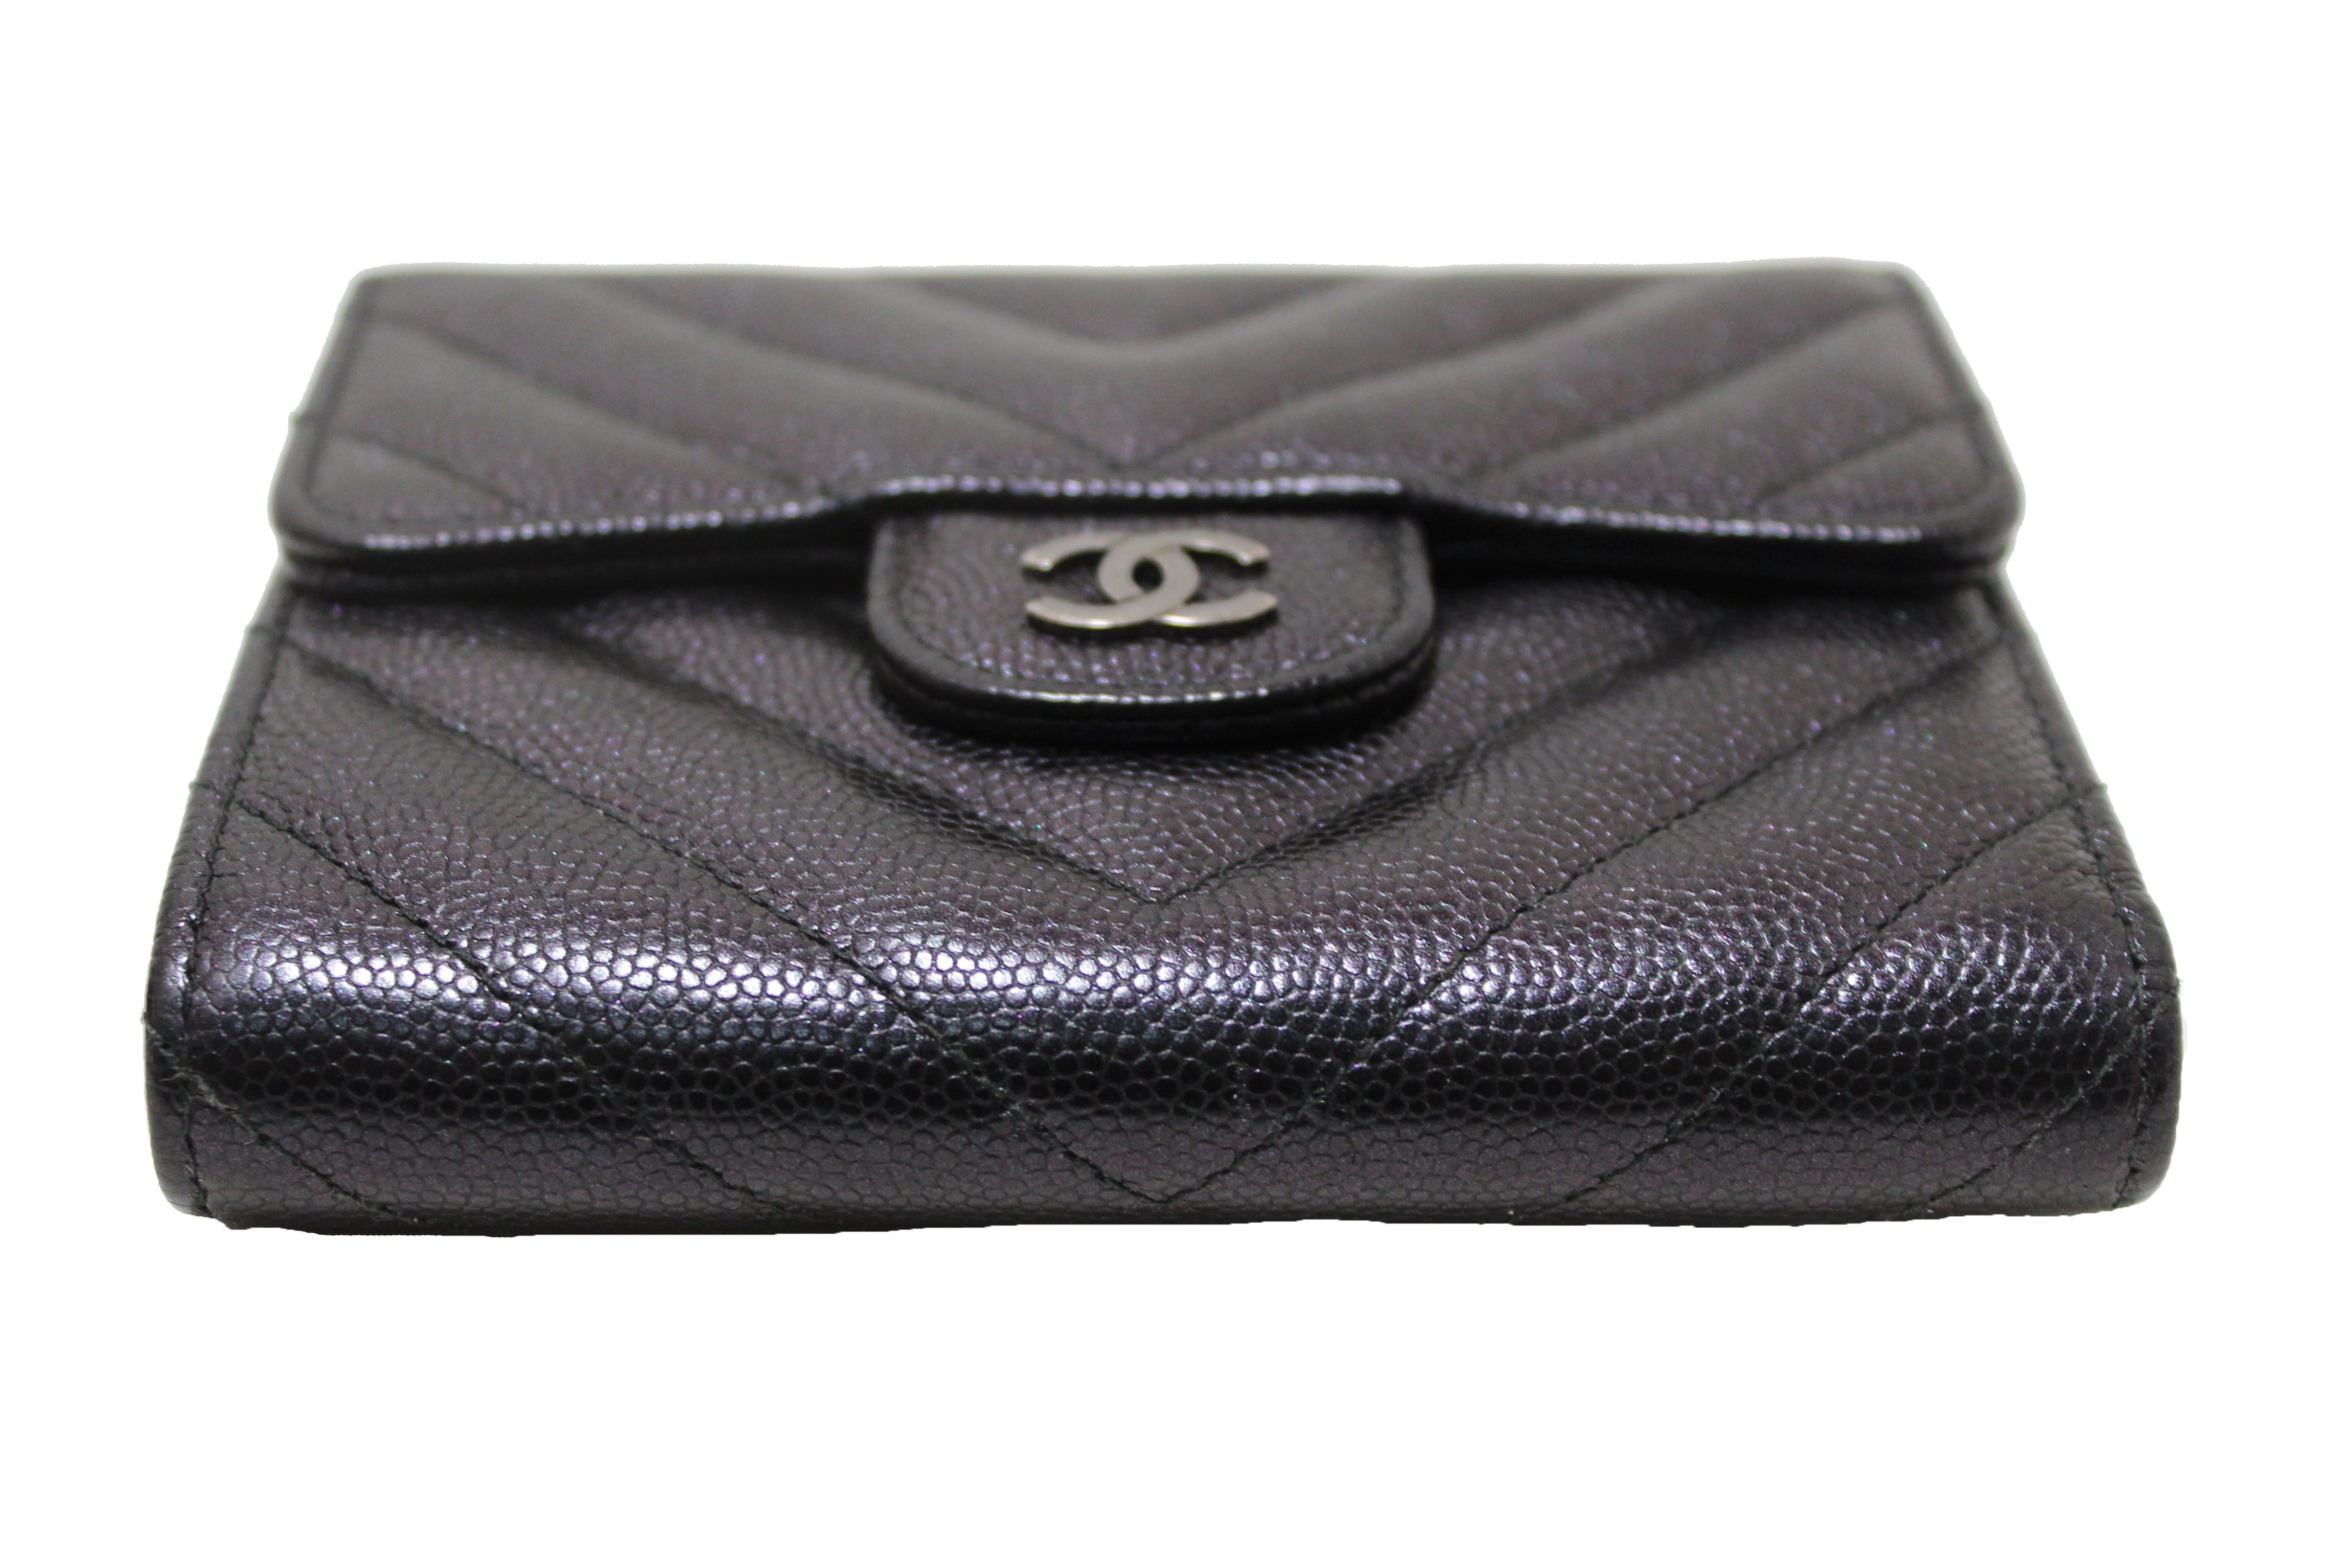 Chanel Chevron Quilted Compact Flap Wallet